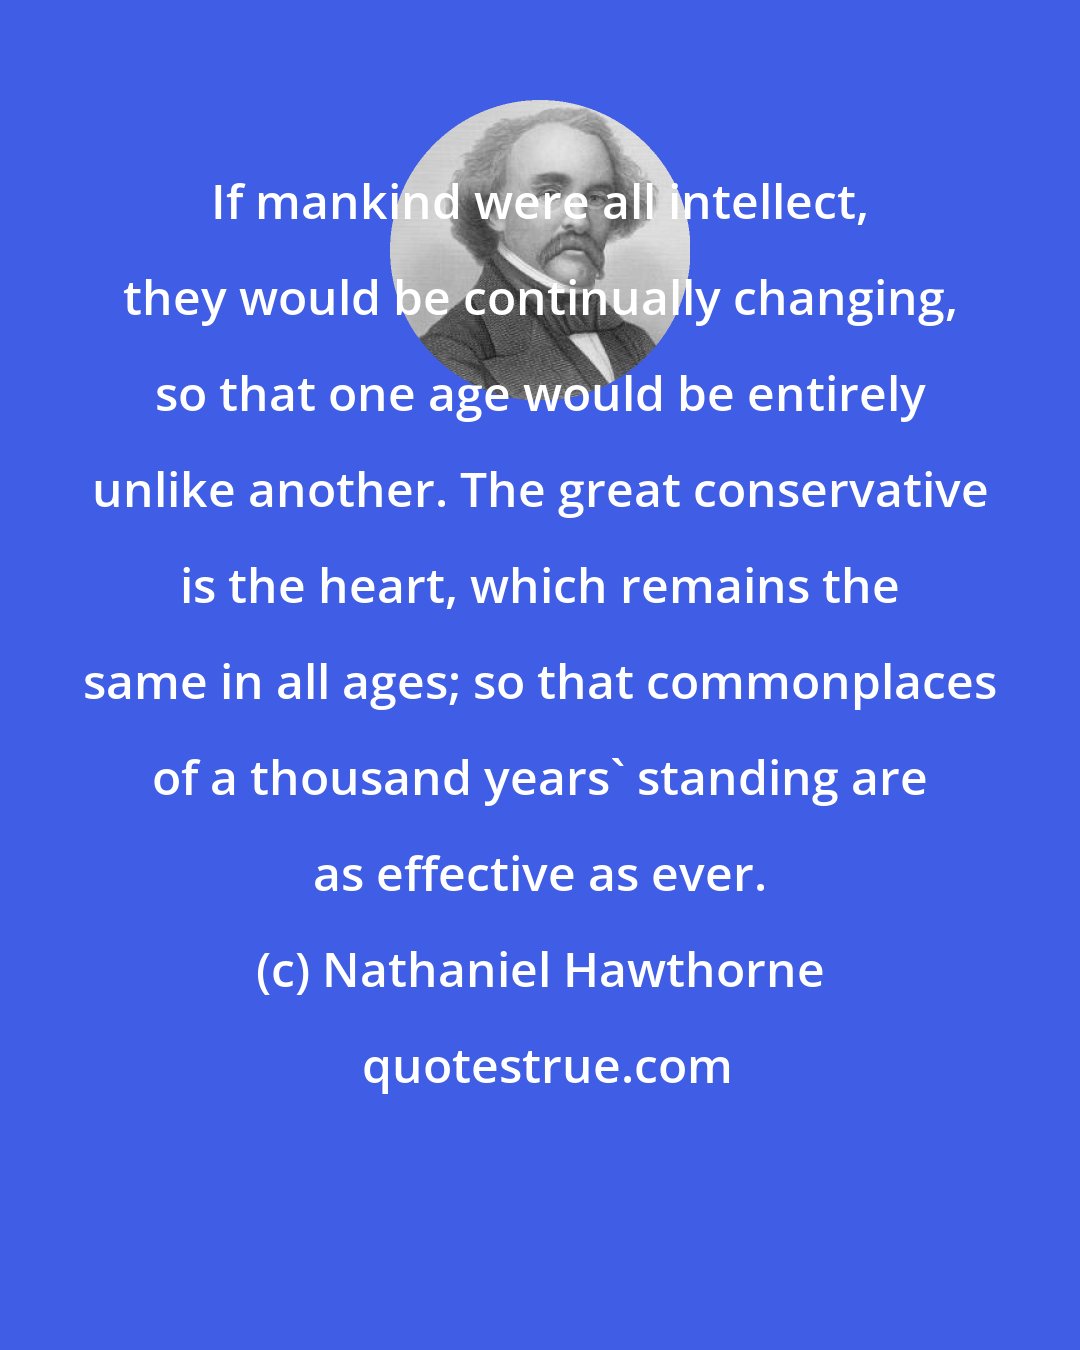 Nathaniel Hawthorne: If mankind were all intellect, they would be continually changing, so that one age would be entirely unlike another. The great conservative is the heart, which remains the same in all ages; so that commonplaces of a thousand years' standing are as effective as ever.